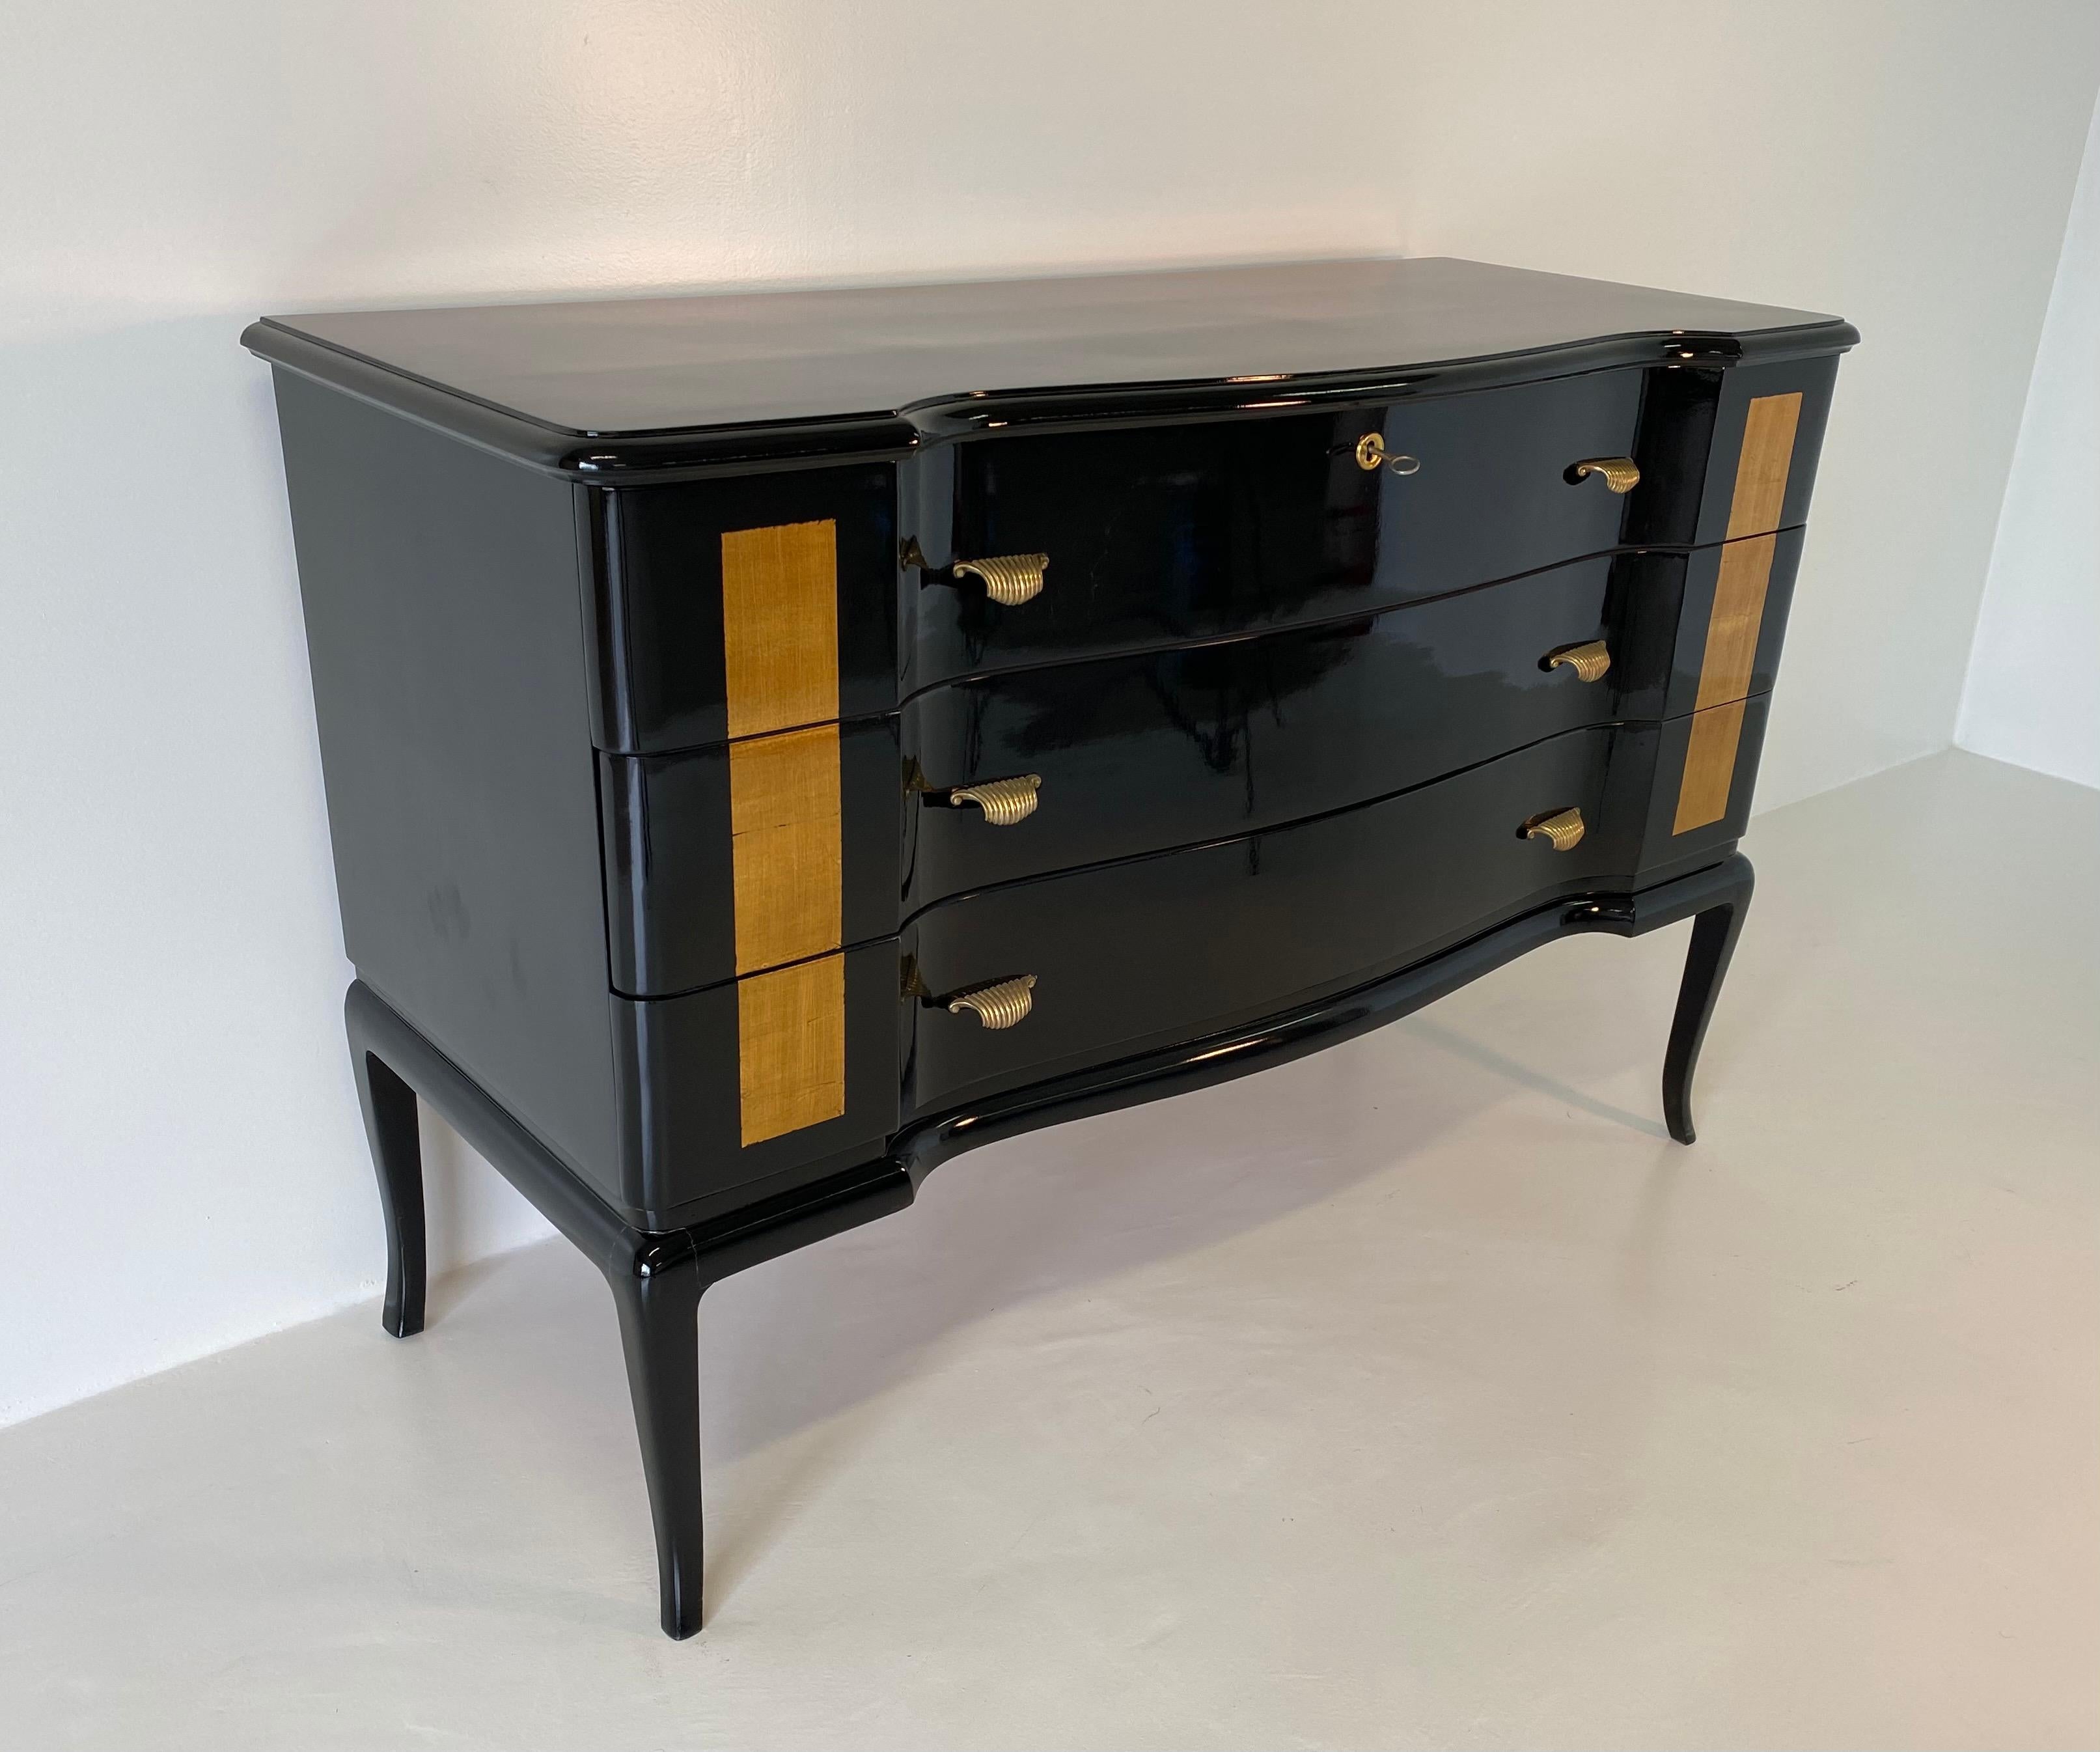 This dresser was produced in the 1950s in Italy.
It is completely black lacquered while the front is decorated with gold leaf.
The brass handles complete the elegance of the dresser.